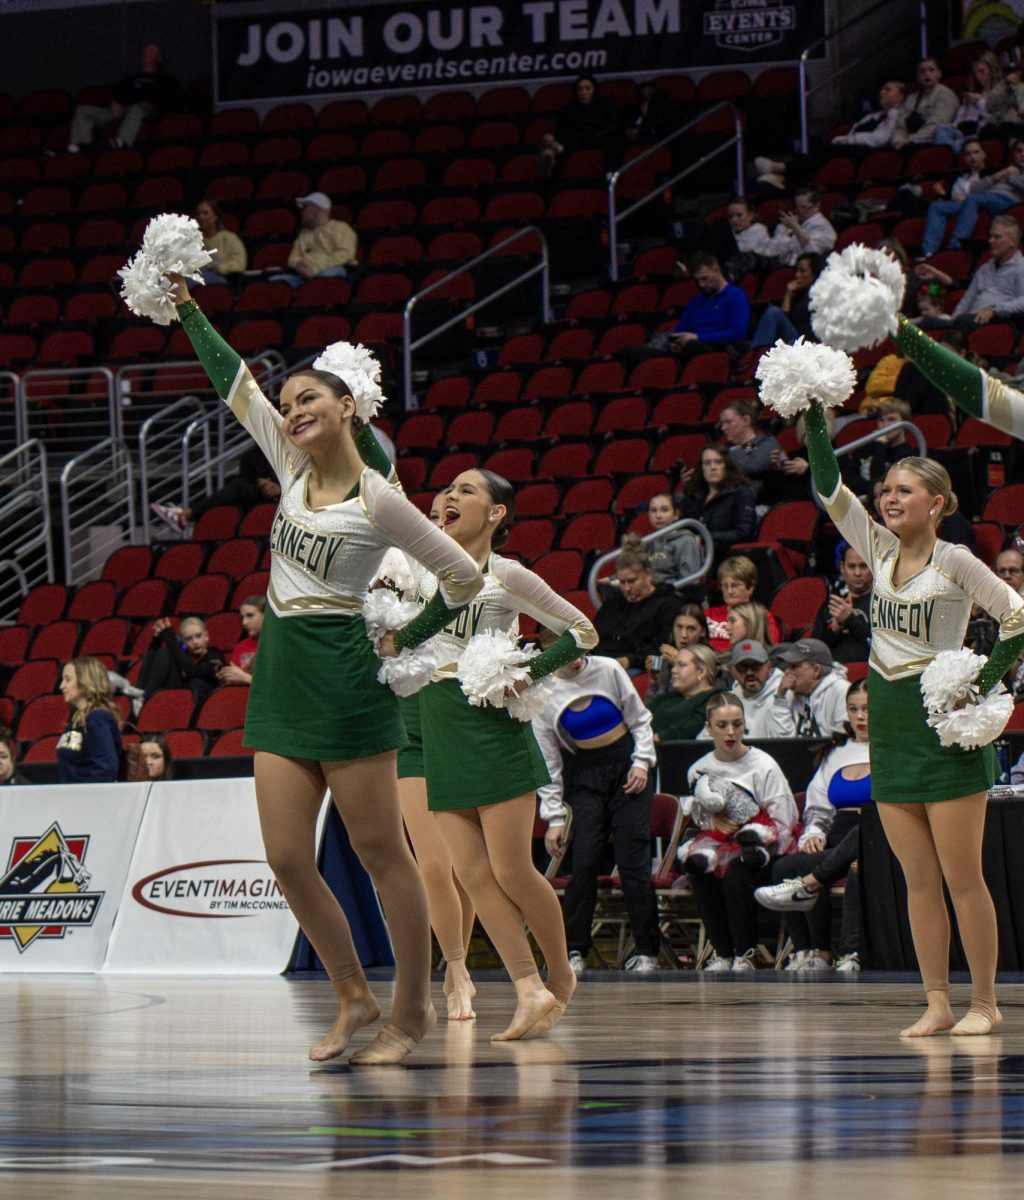 The Kennedy Dance Team exits the floor after performing their Poms routine.